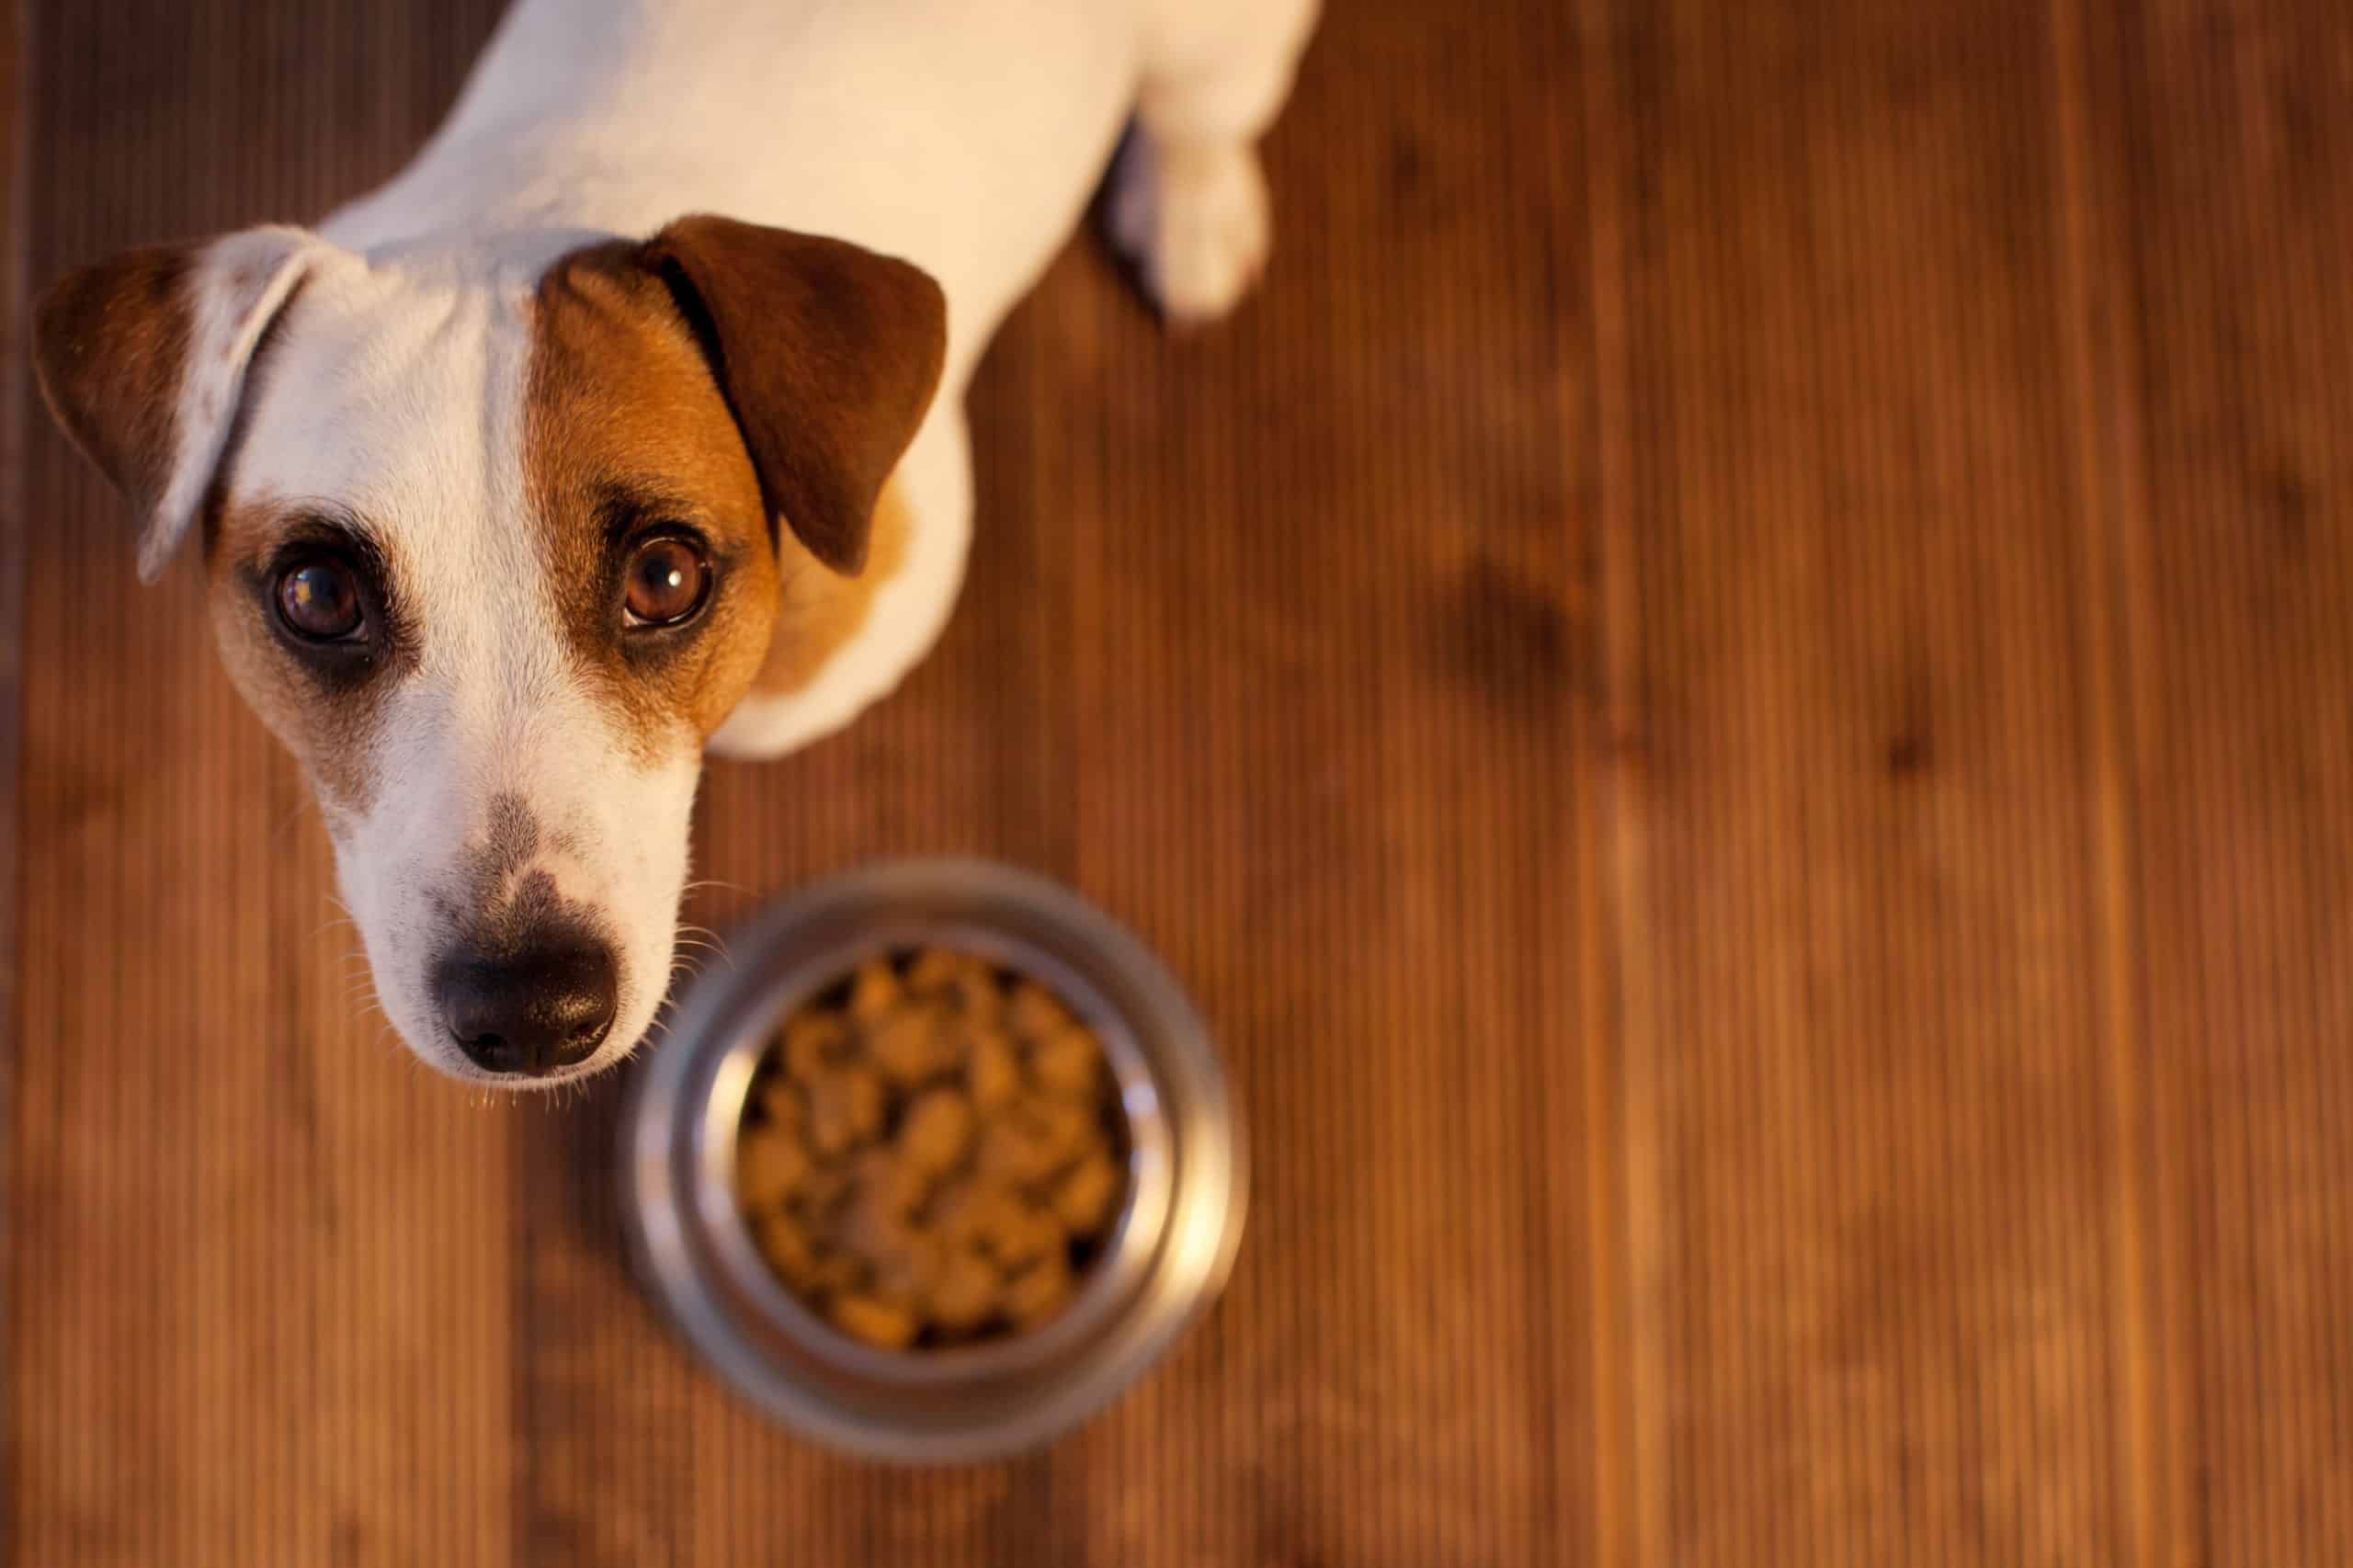 Why does my dog wait for me to leave before eating?